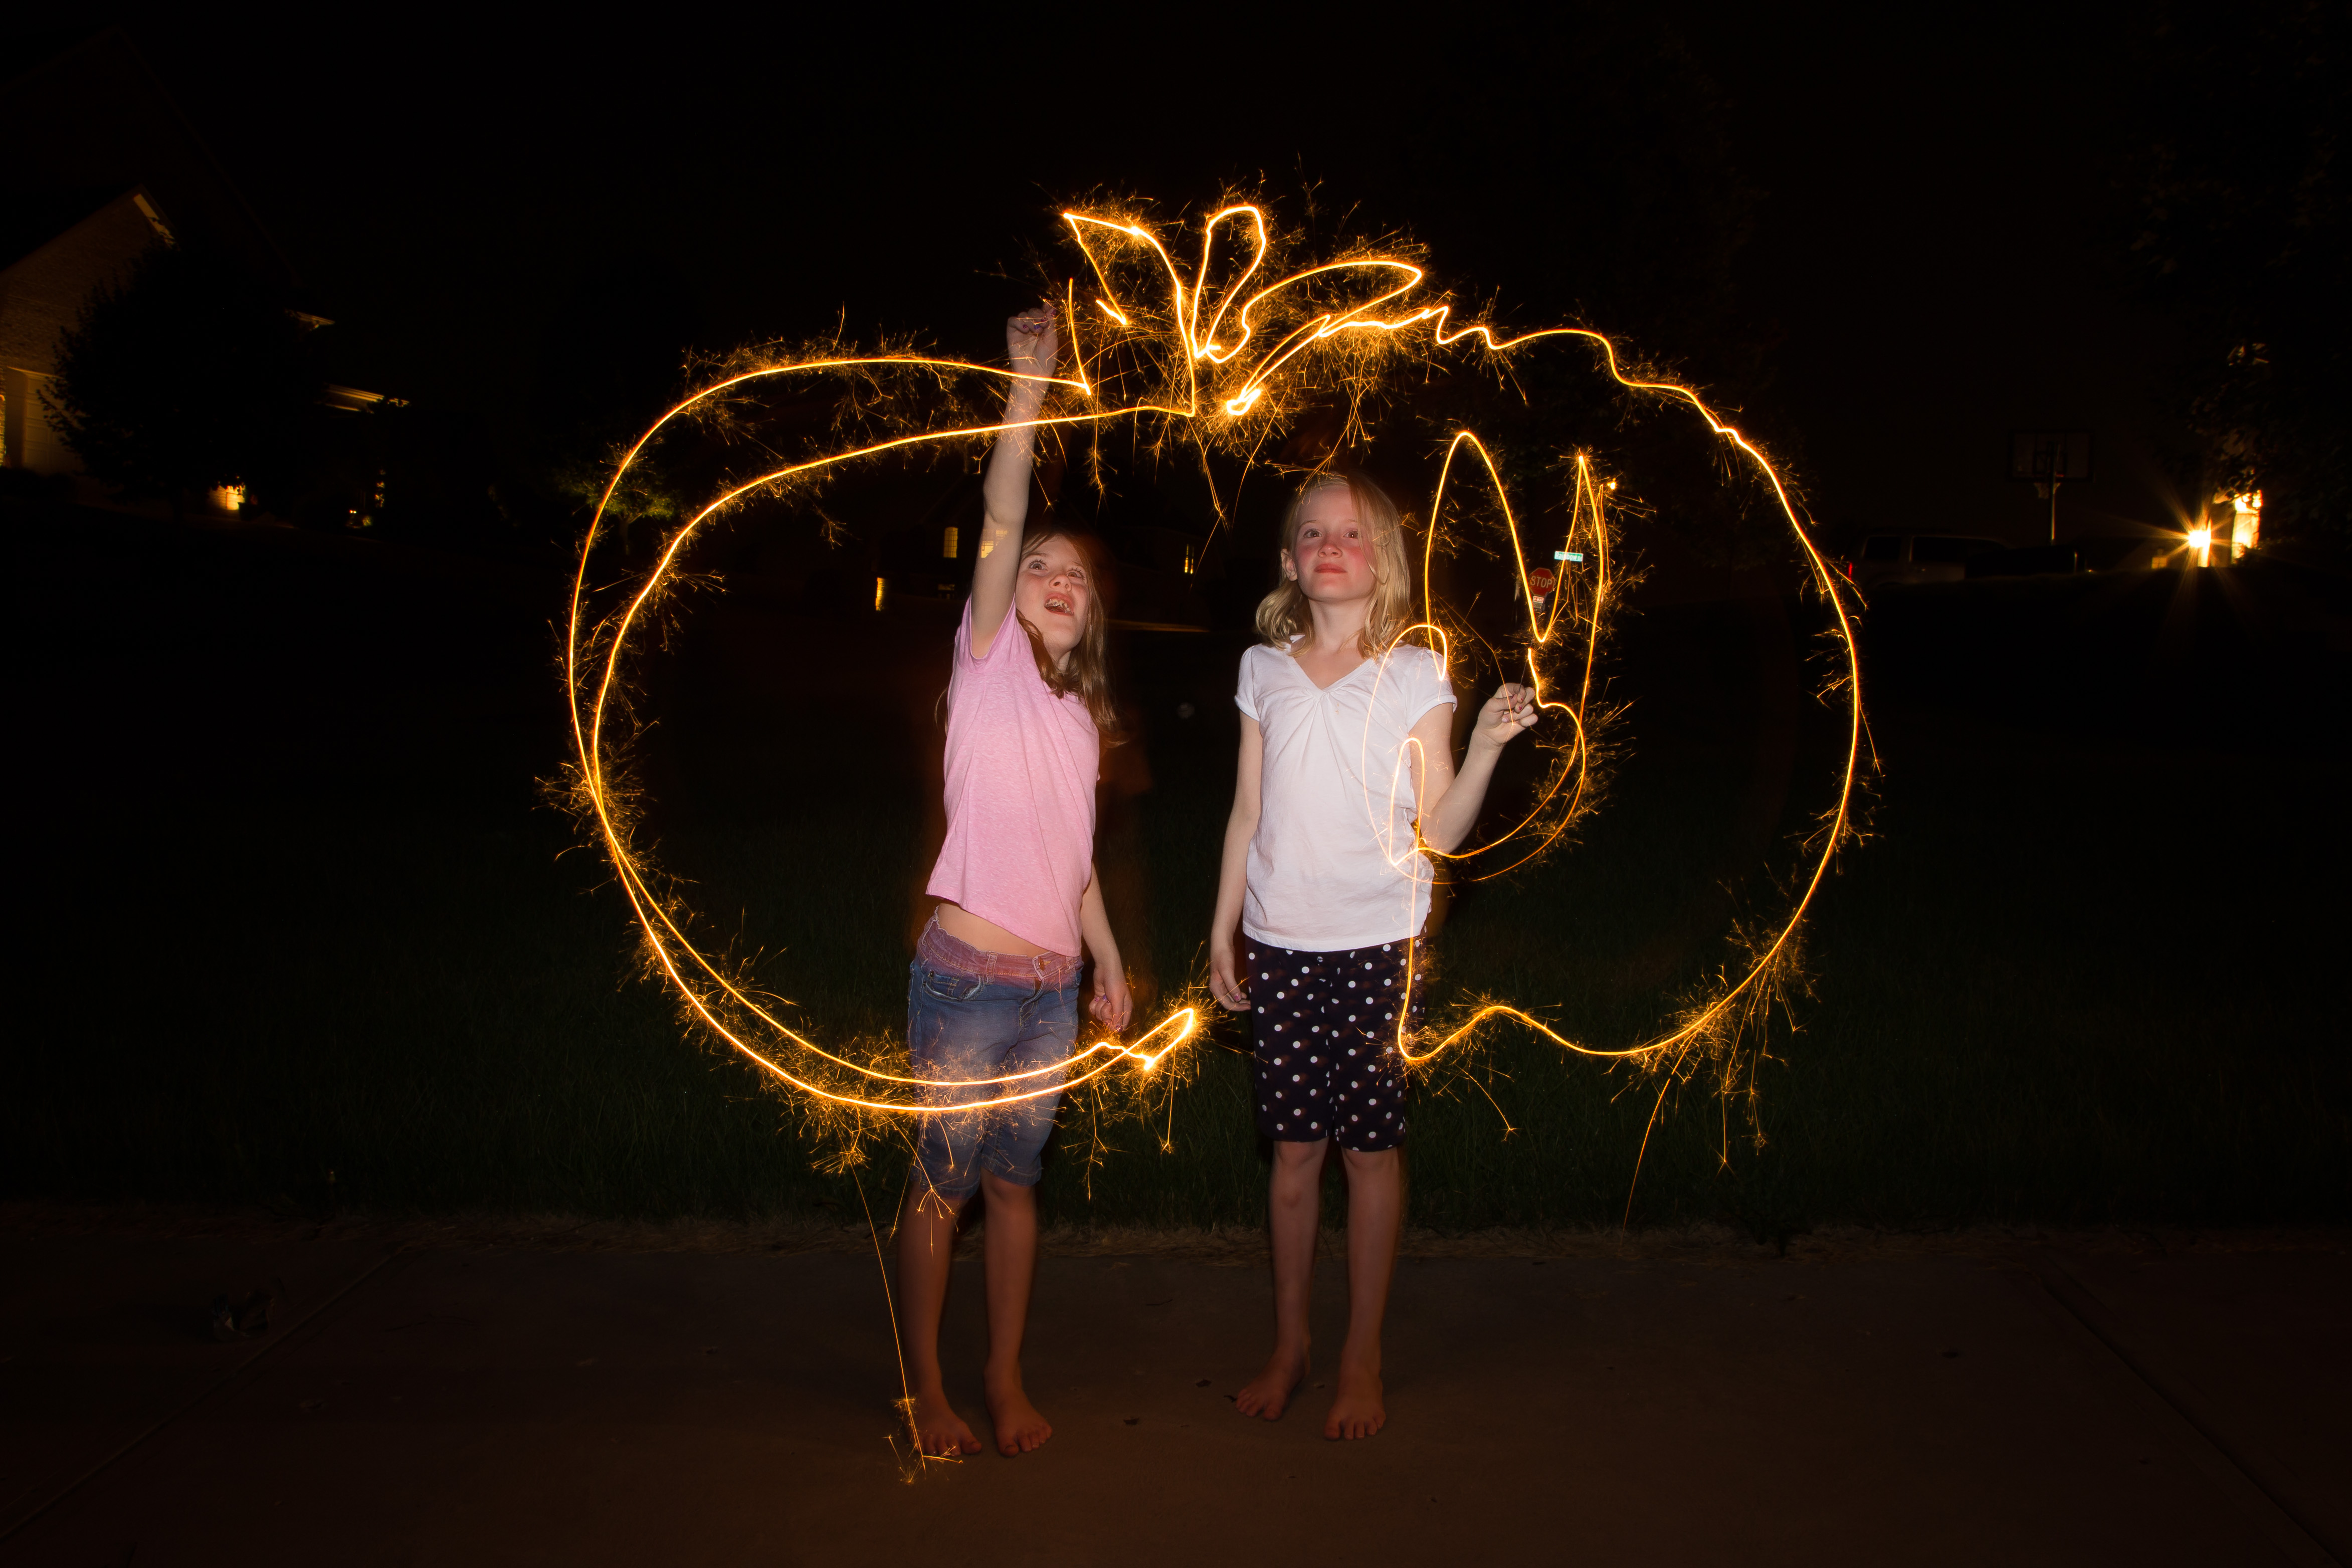 2015-07-04;Sparklers and pool 2 (10 of 12).JPG